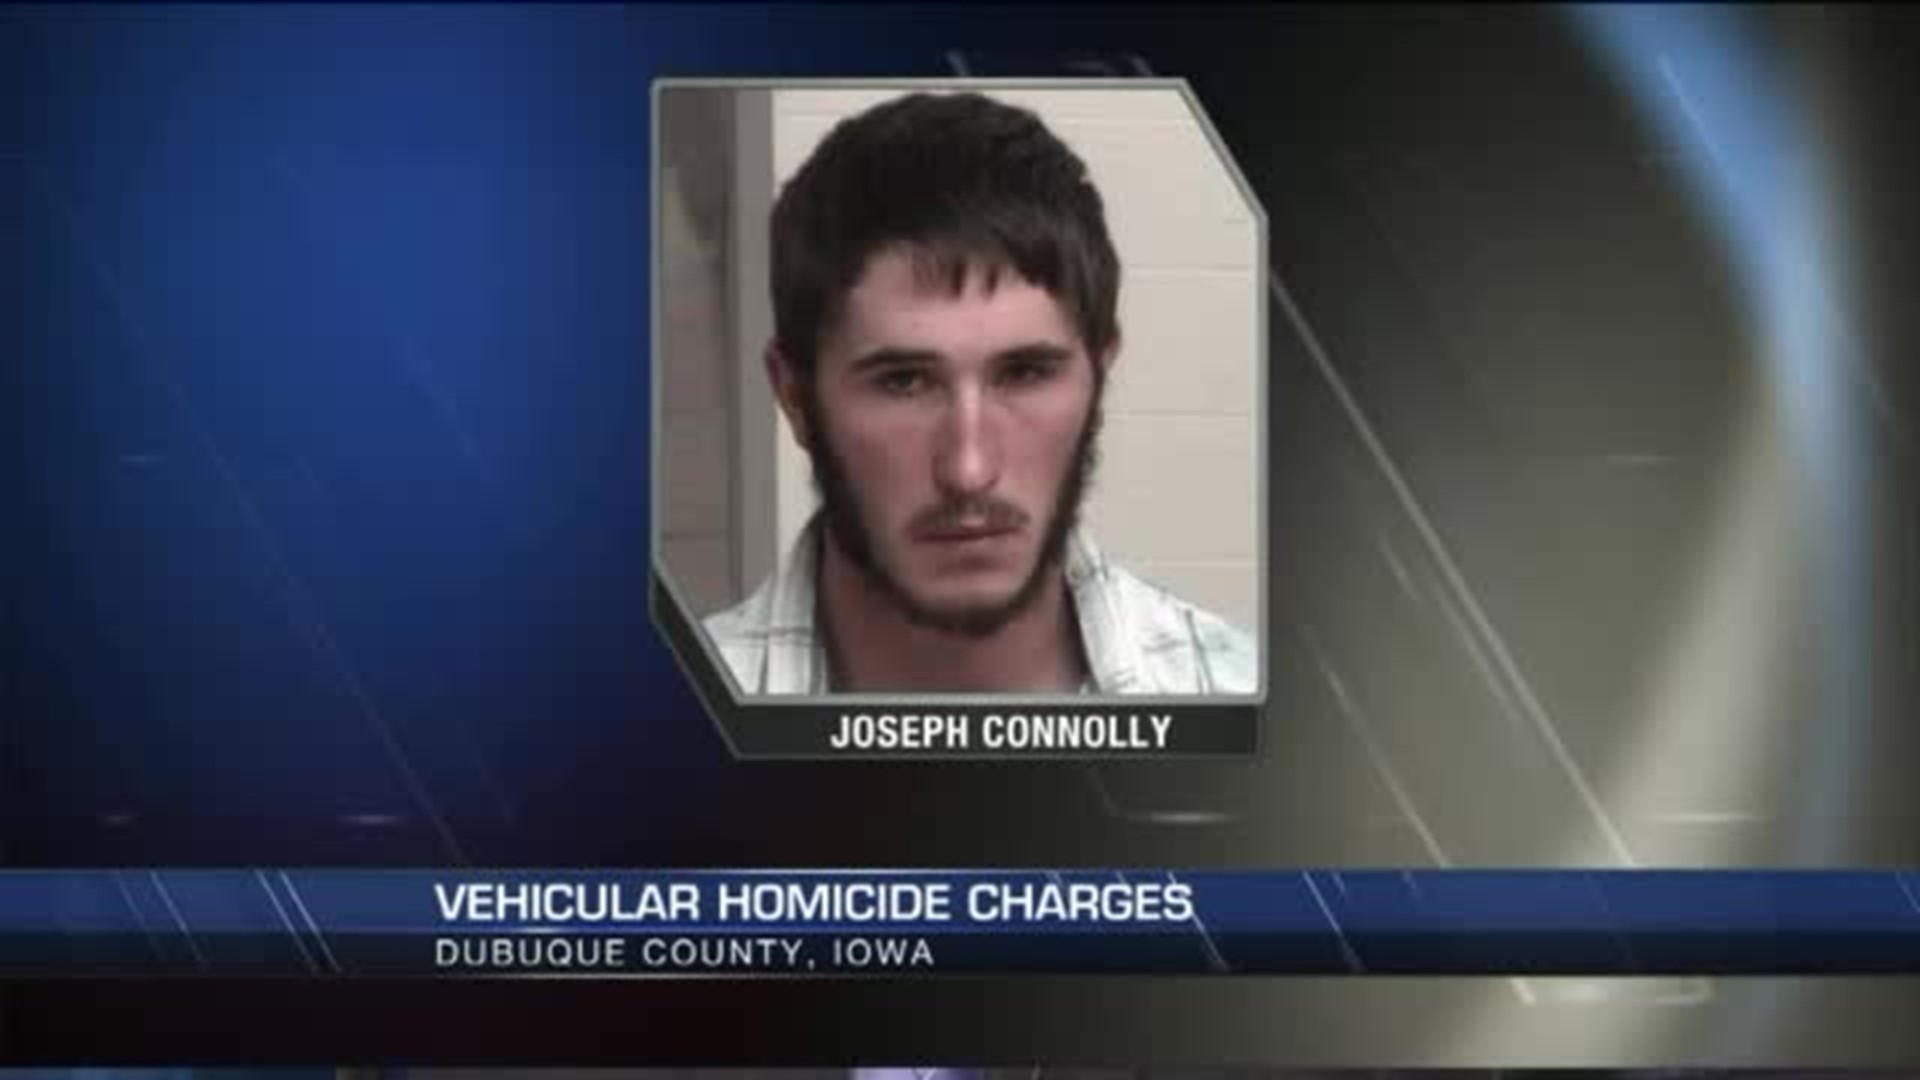 Man faces vehicular homicide charges